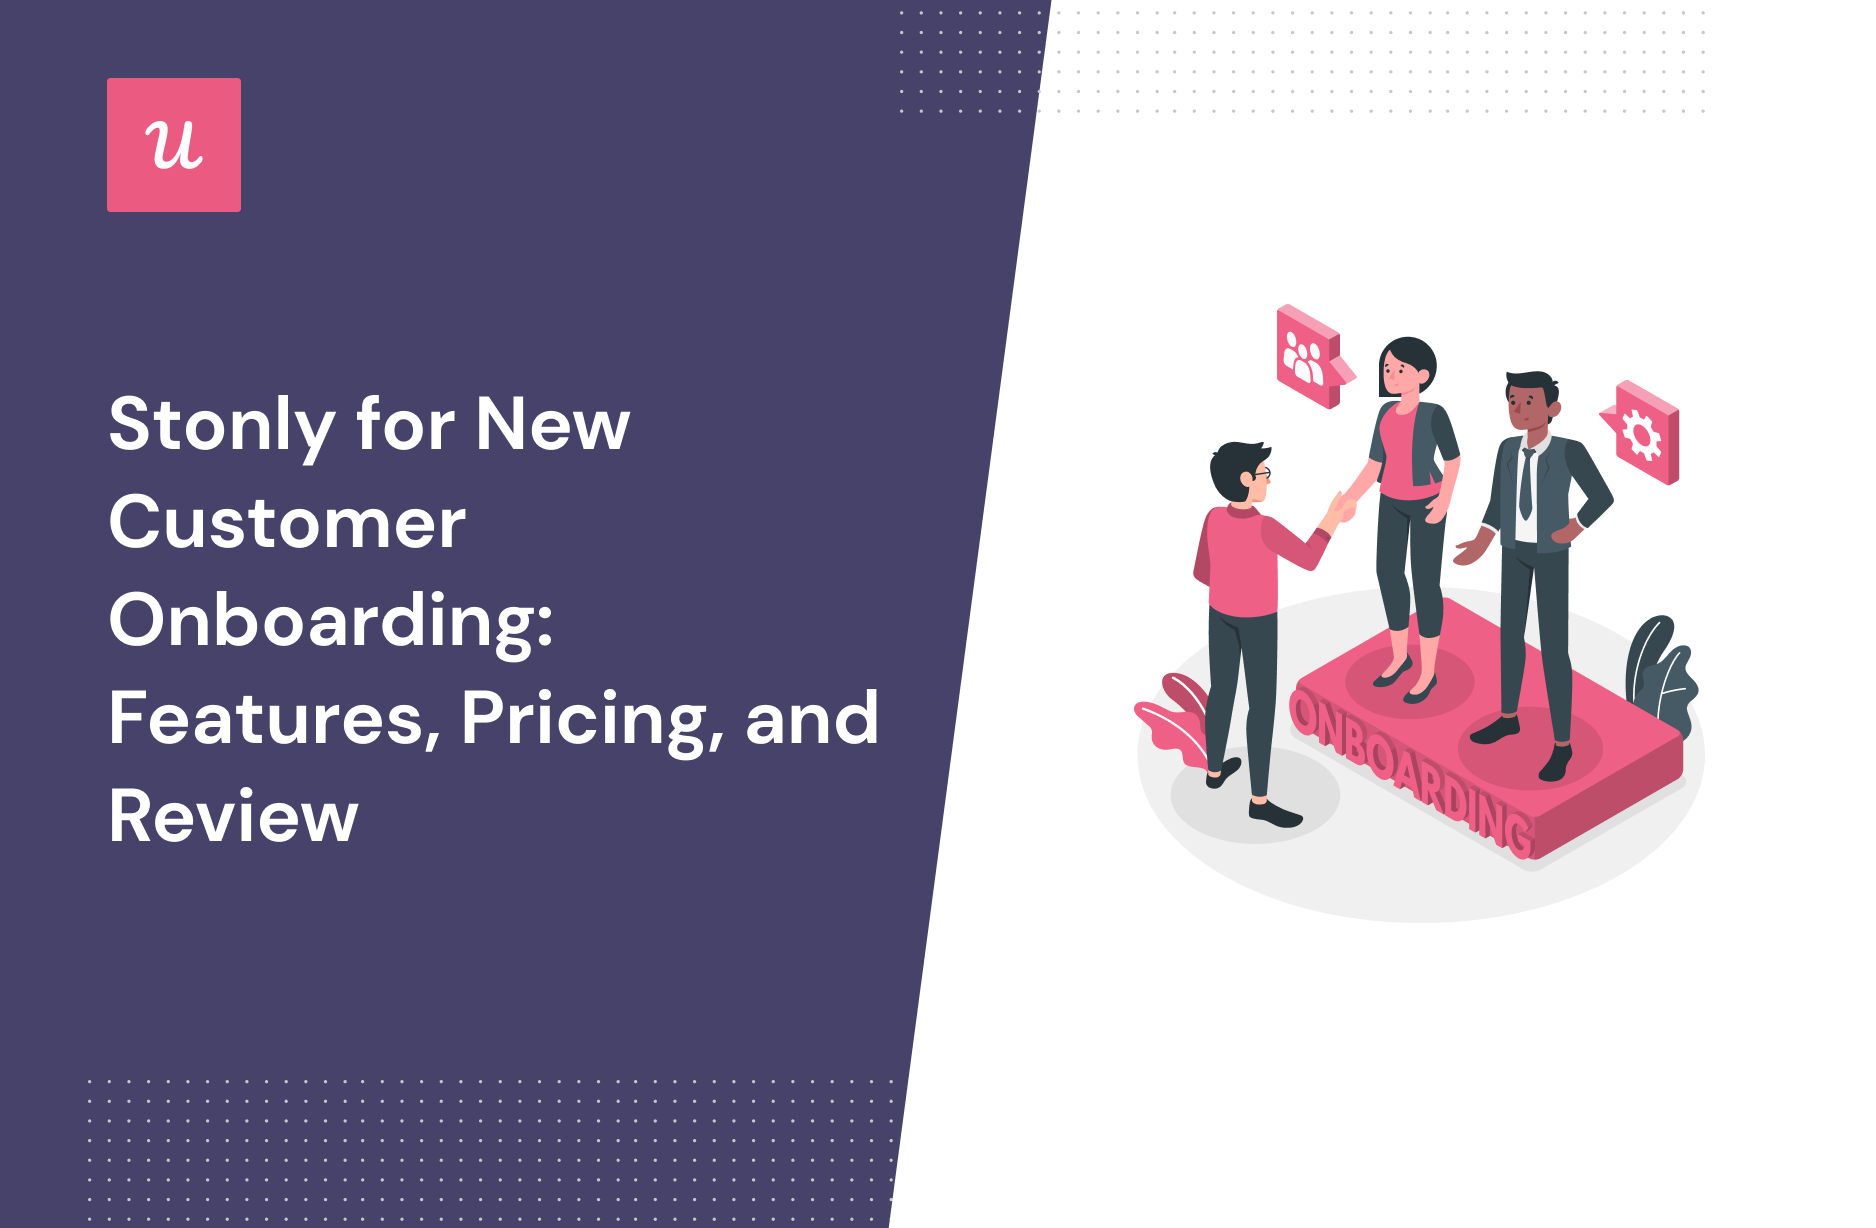 Stonly for New Customer Onboarding: Features, Pricing, and Review